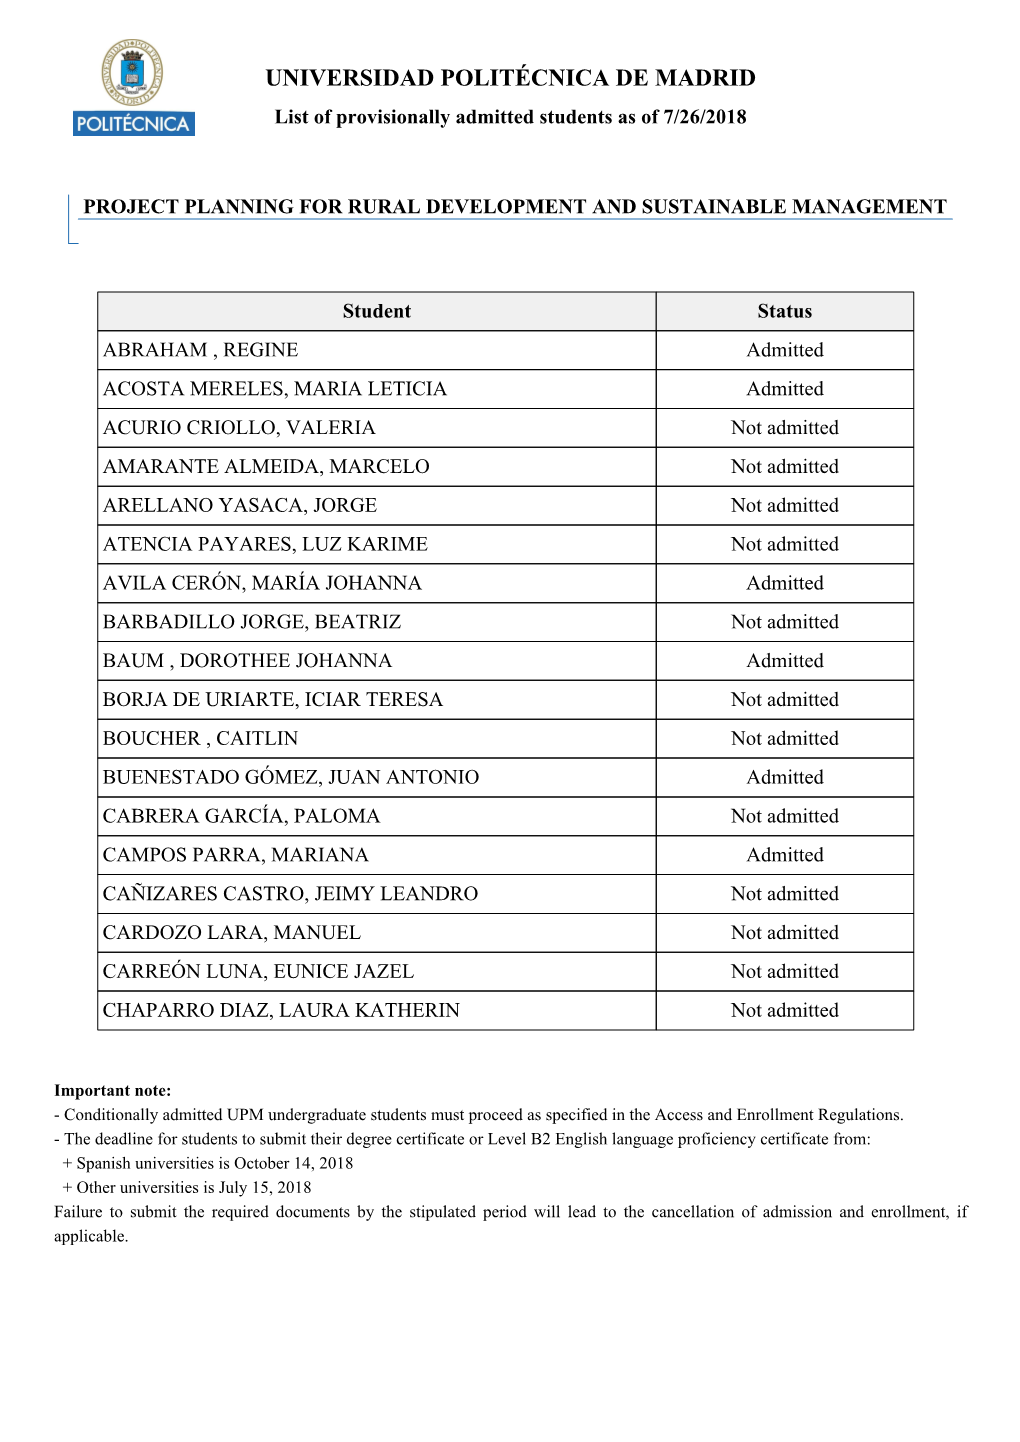 UNIVERSIDAD POLITÉCNICA DE MADRID List of Provisionally Admitted Students As of 7/26/2018